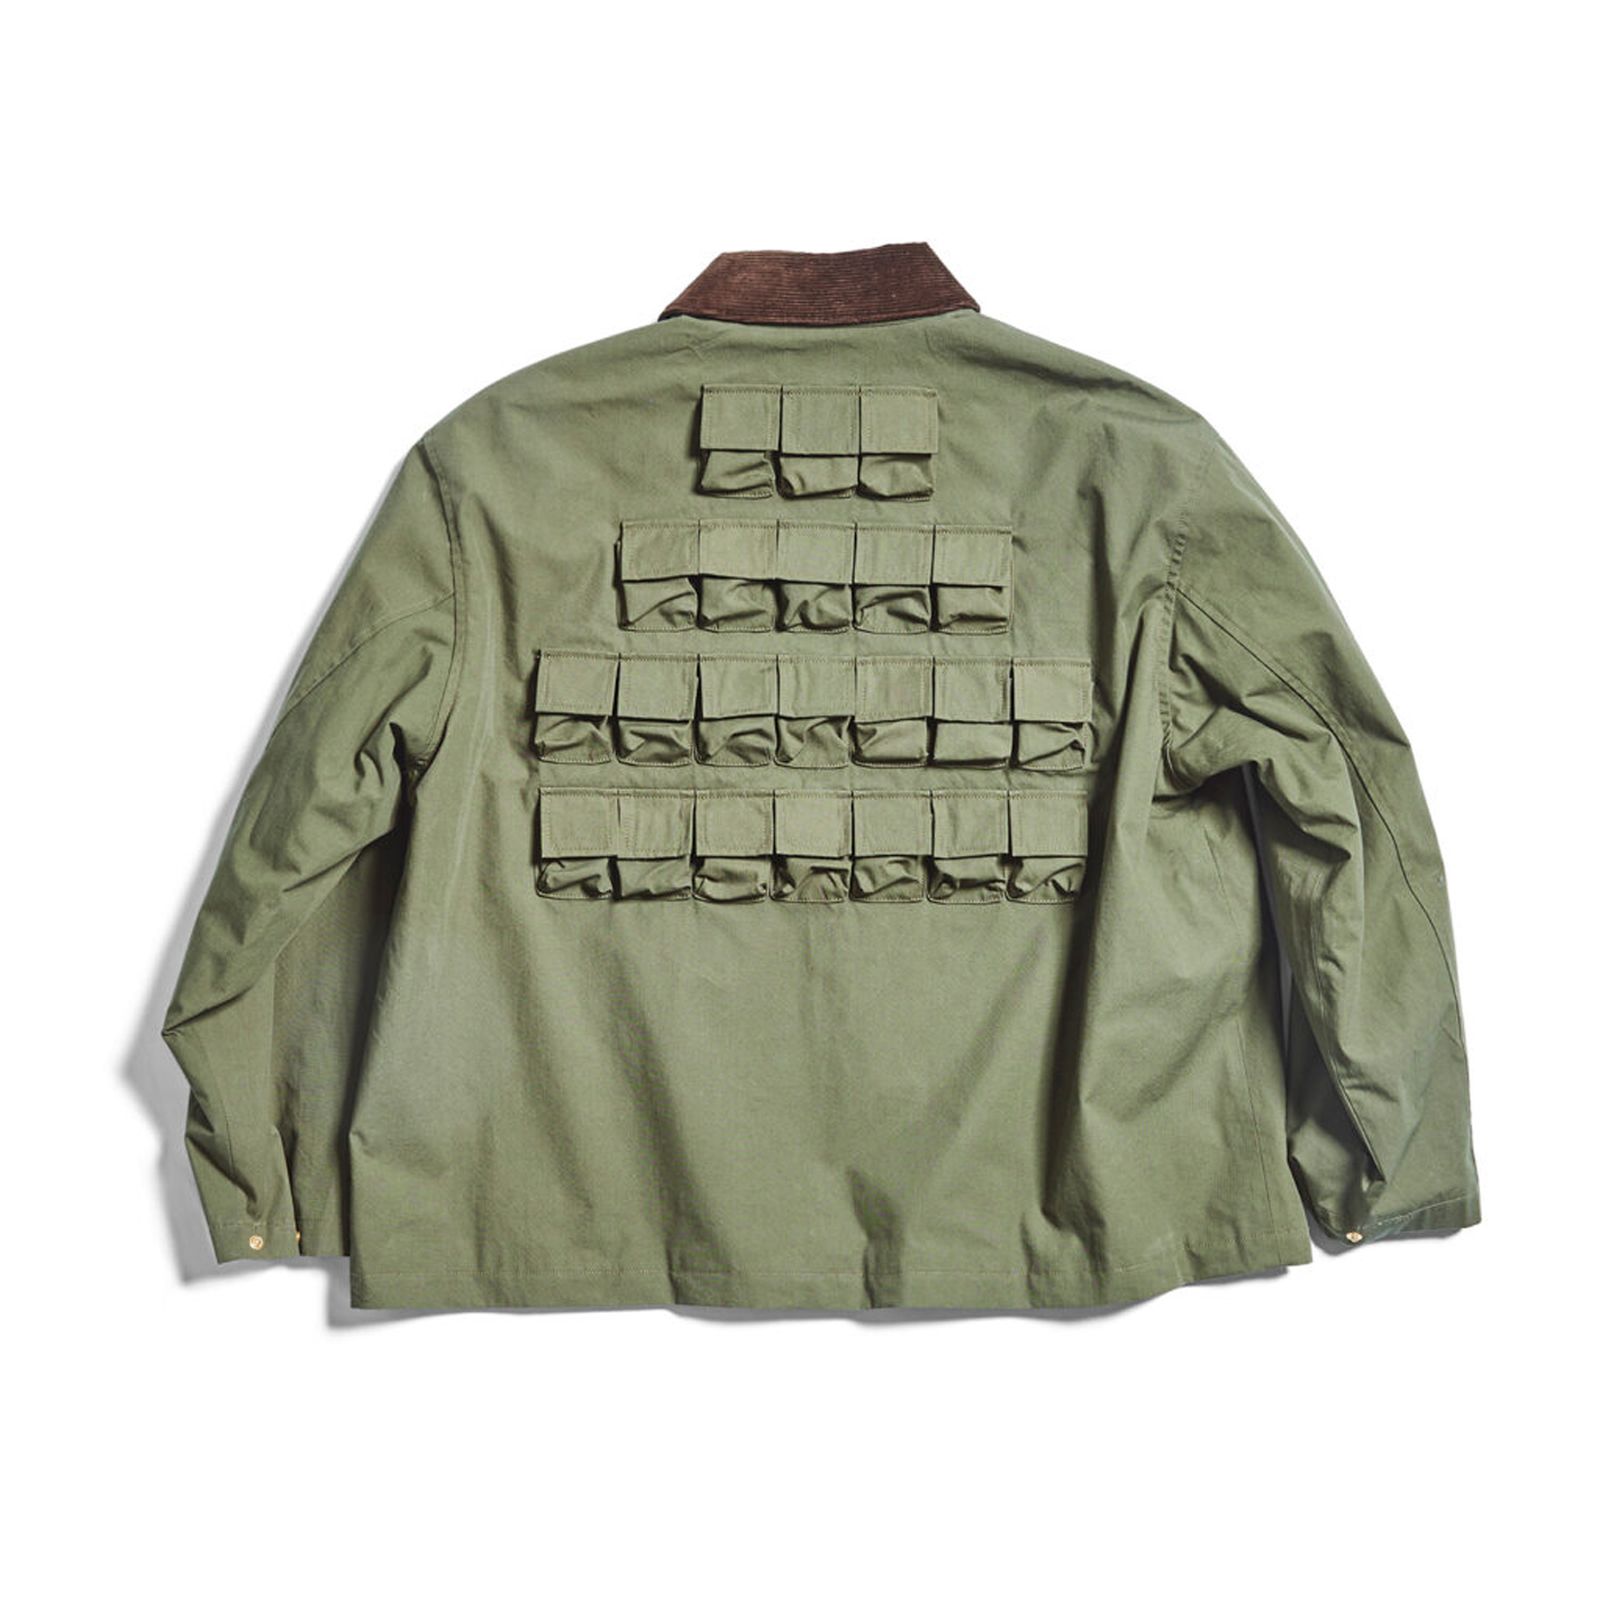 general-research-is-ness-parasite-pocket-jacket (13)